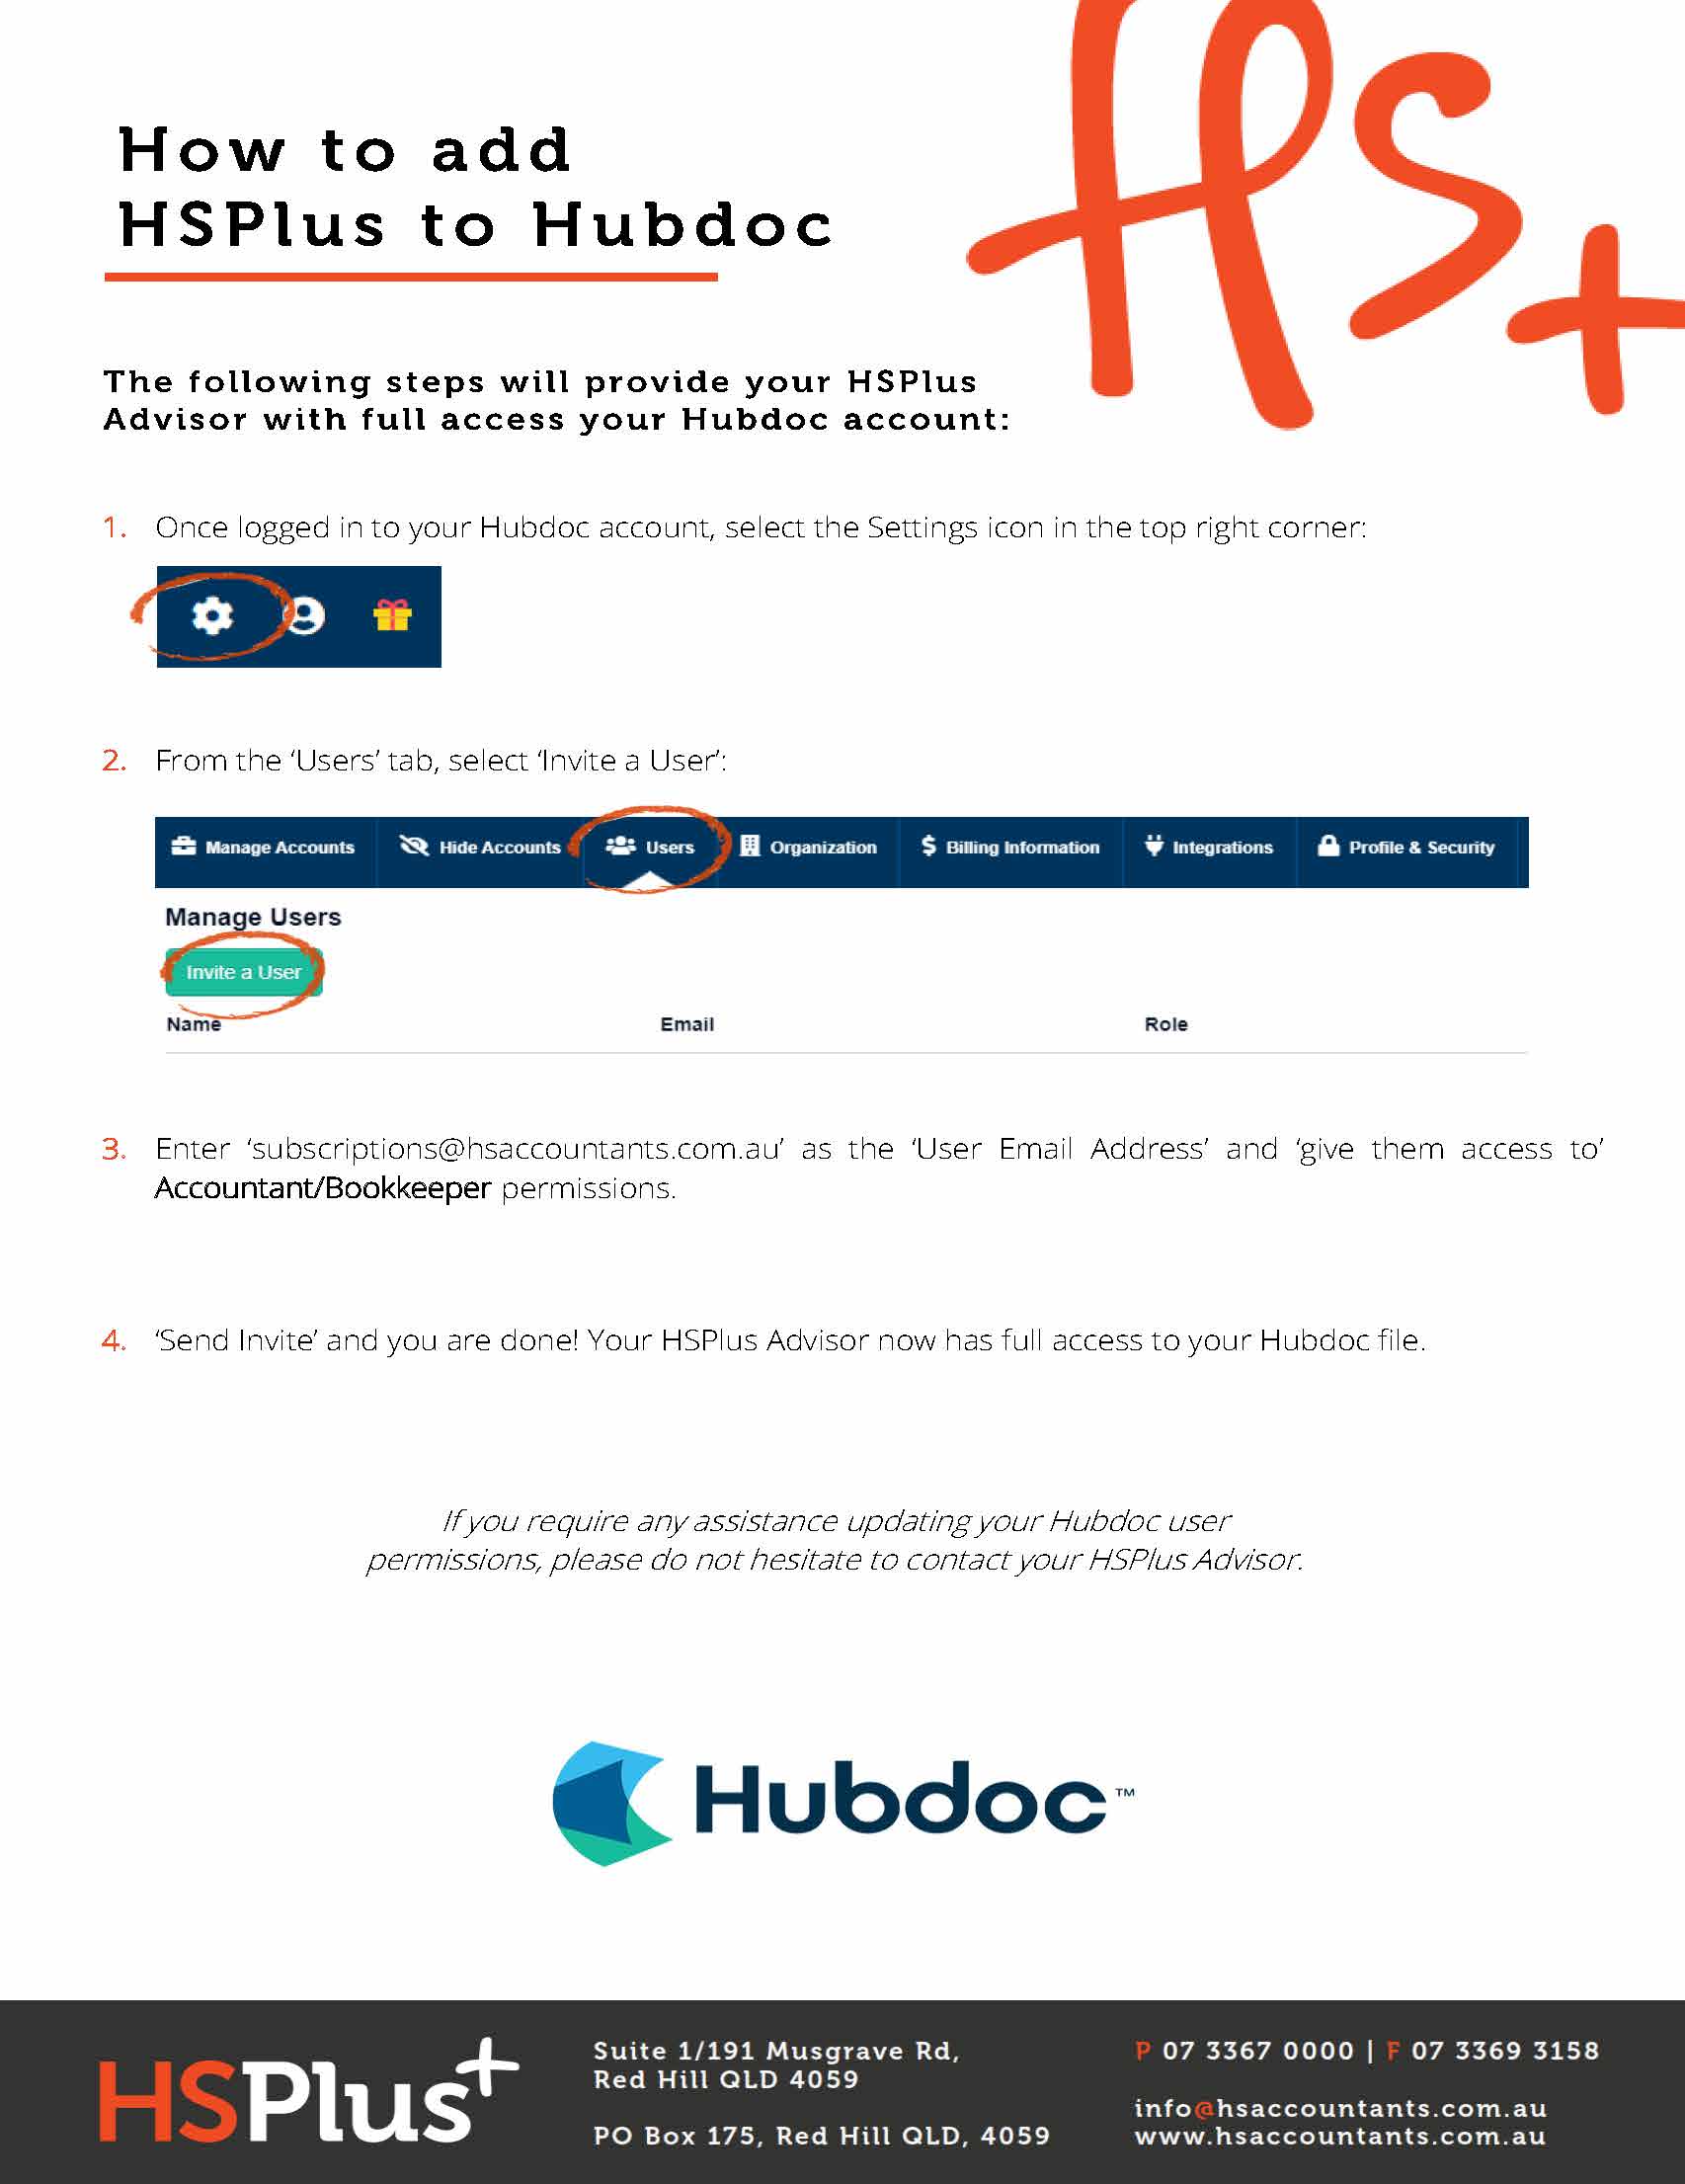 How to add HSPlus to Hubdoc